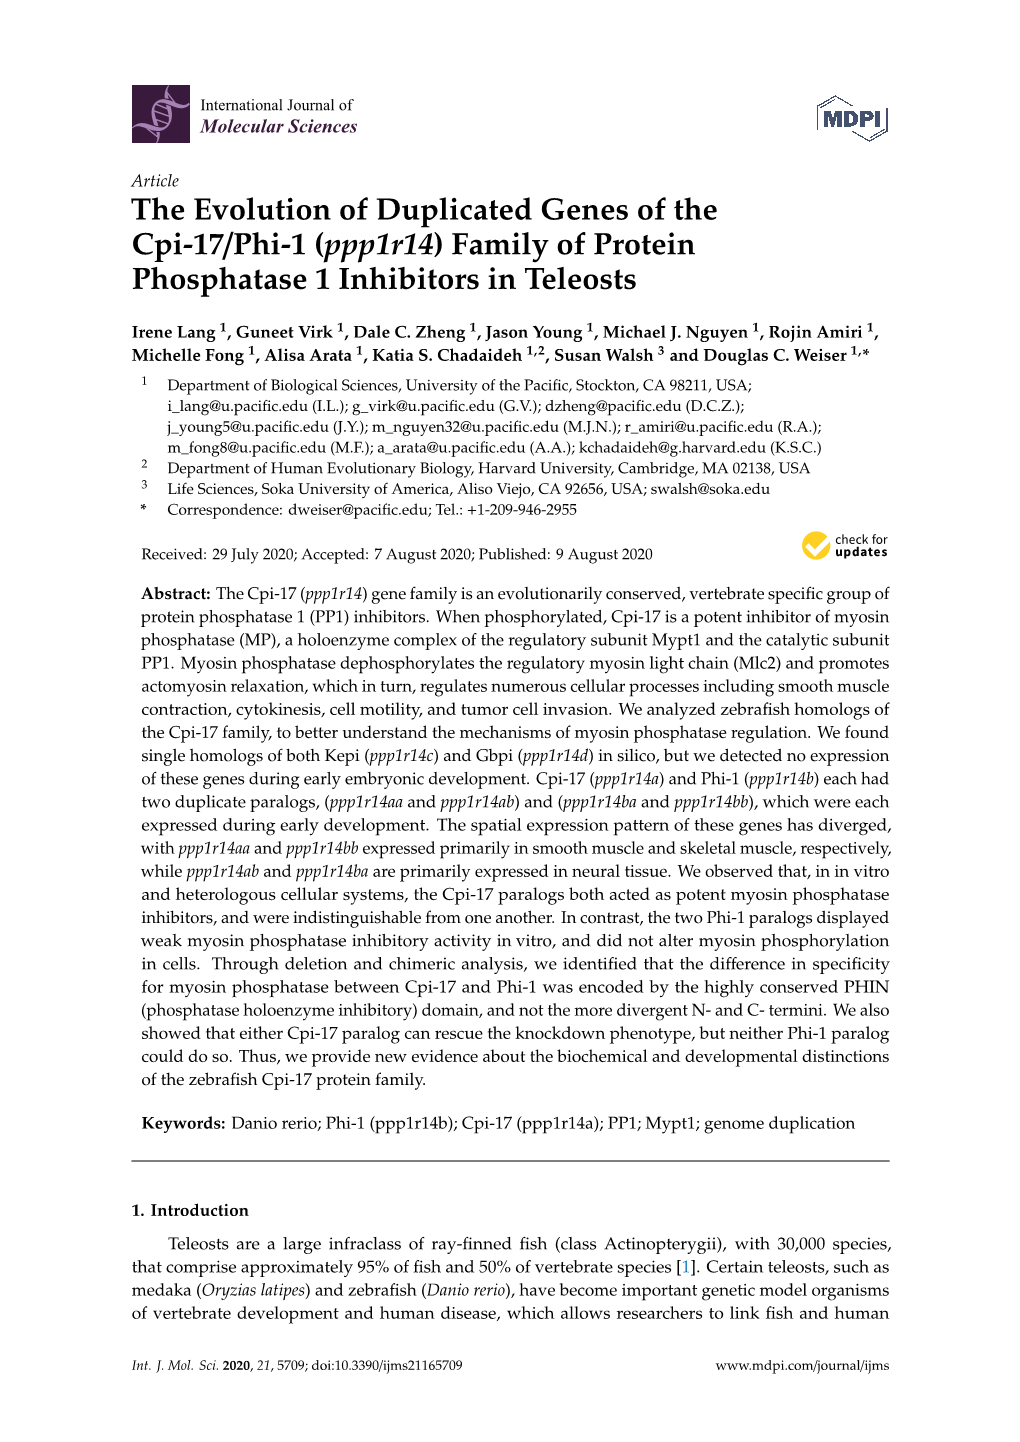 (Ppp1r14) Family of Protein Phosphatase 1 Inhibitors in Teleosts